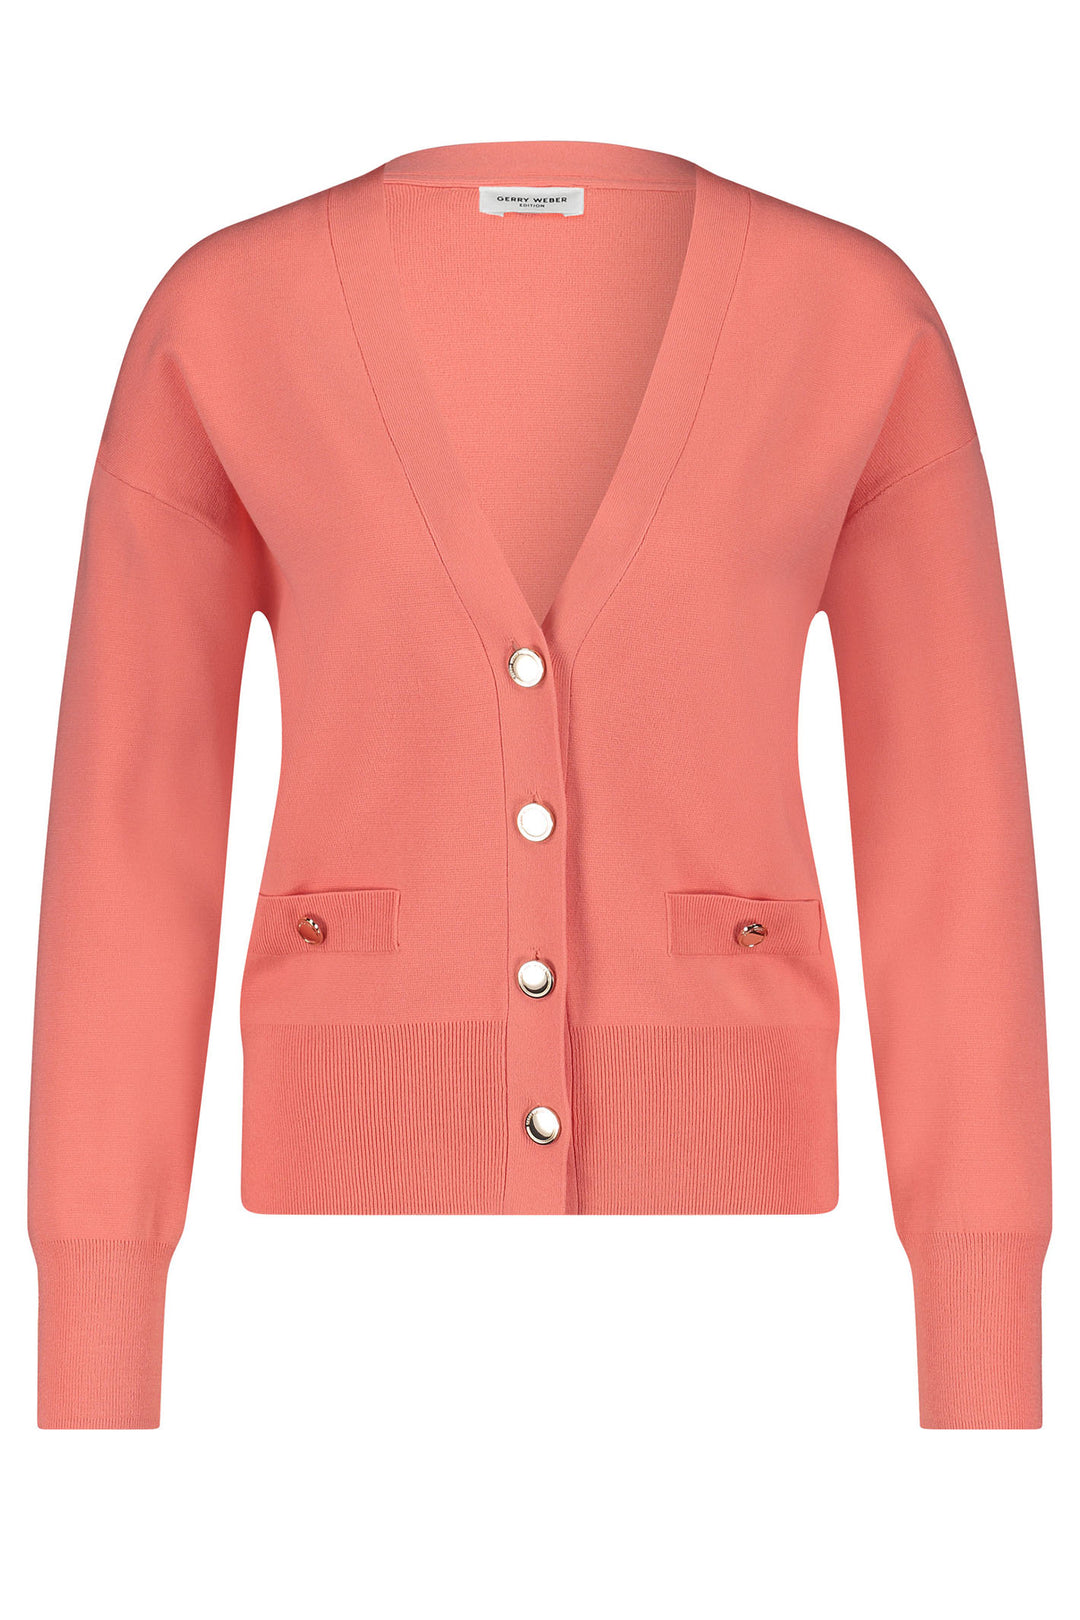 Gerry Weber 230202 30873 Neon Rose Knitted Cardigan Jacket - Experience Boutique